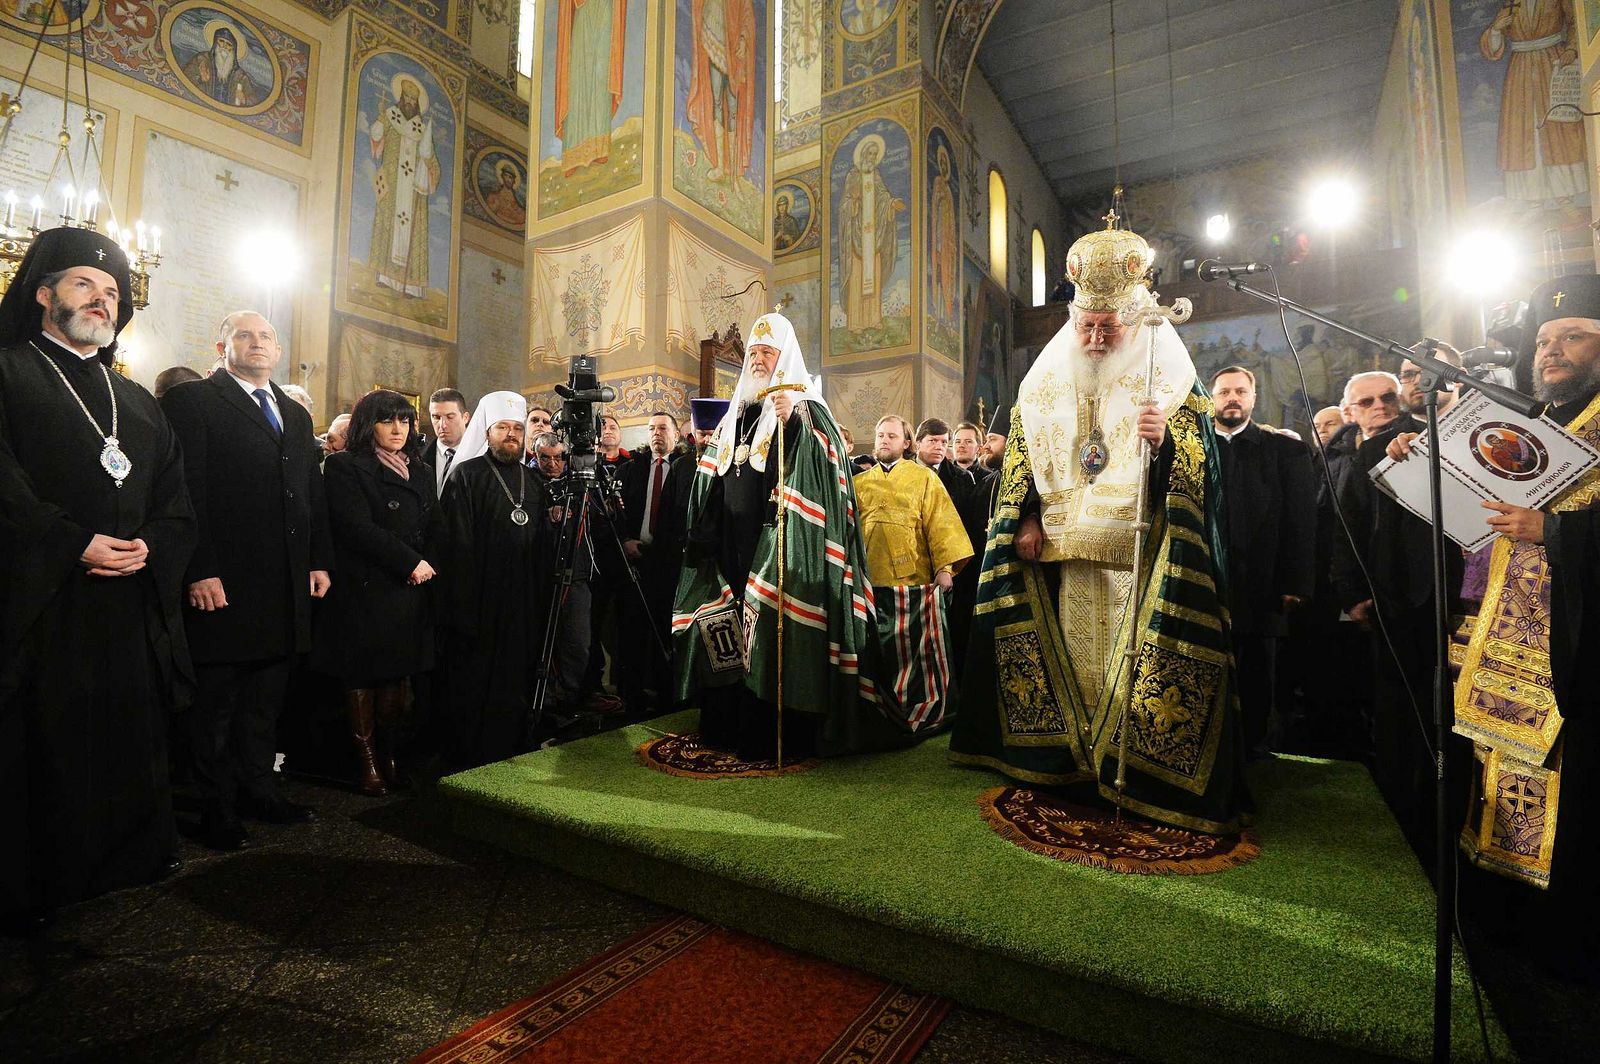 PATRIARCHS OF BULGARIA AND RUSSIA CONCELEBRATE IN HONOR OF 140TH ANNIVERSARY OF BULGARIAN LIBERATION